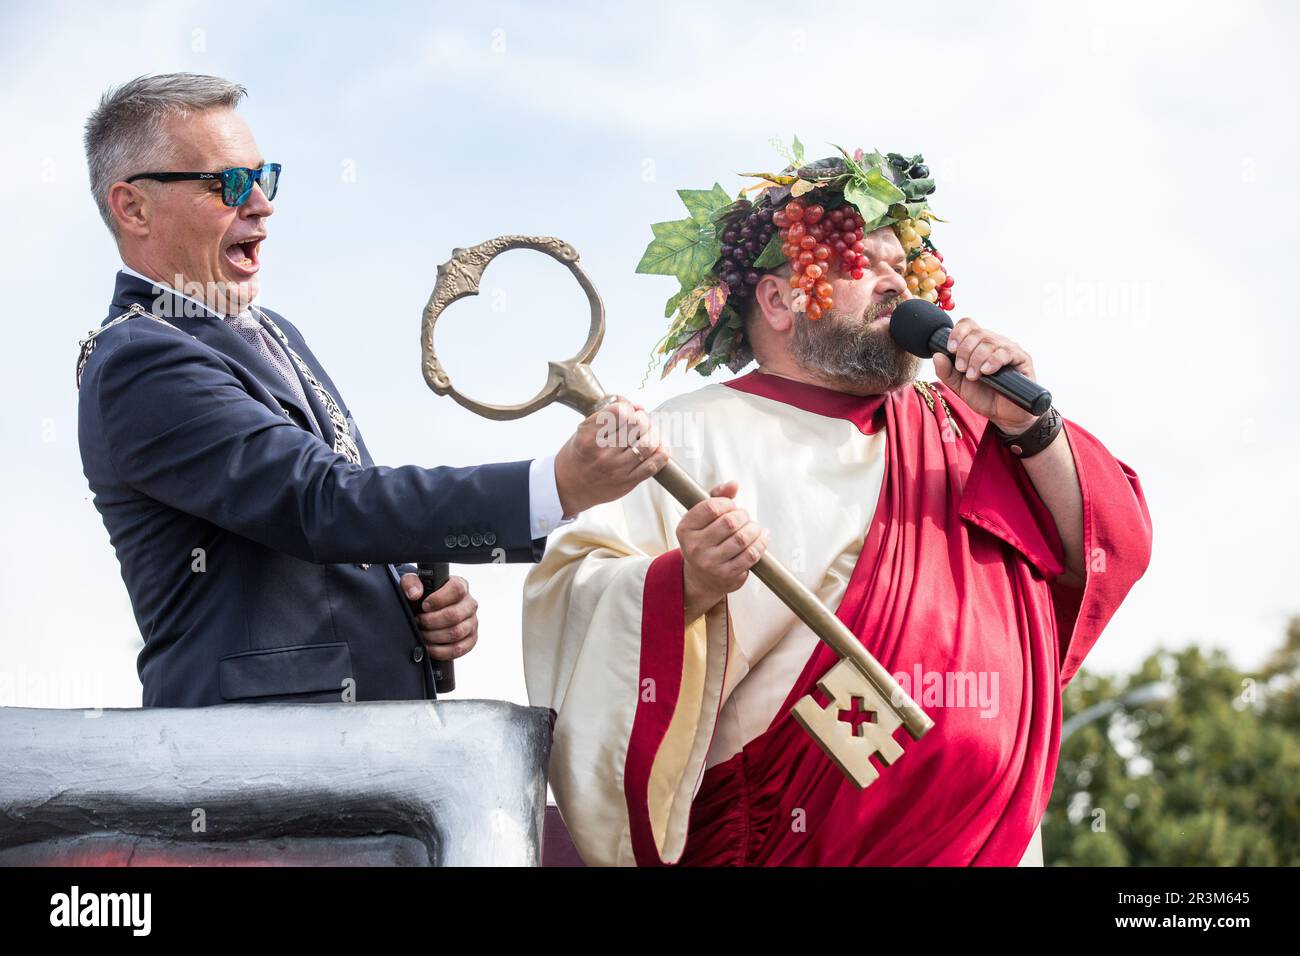 Mayor of Zielona Gora; Janusz Kubicki and a man in a Bacchus costume seen during the traditional Winobranie Wine Festival Parade. The local winemakers and artists, schools, as well as the residents of Zielona Gora take part in it, strolling down the main streets of the city in colourful disguises. Zielona Gora Wine Fest is a wine festival held in the Polish town of Zielona Gora. Winobranie is the biggest wine festival in Poland. The first festival took place in October 1852.During the Winobranie Wine Festival week, Bacchus, the god of wine and a symbol of Zielona Gora, gets the keys to the cit Stock Photo